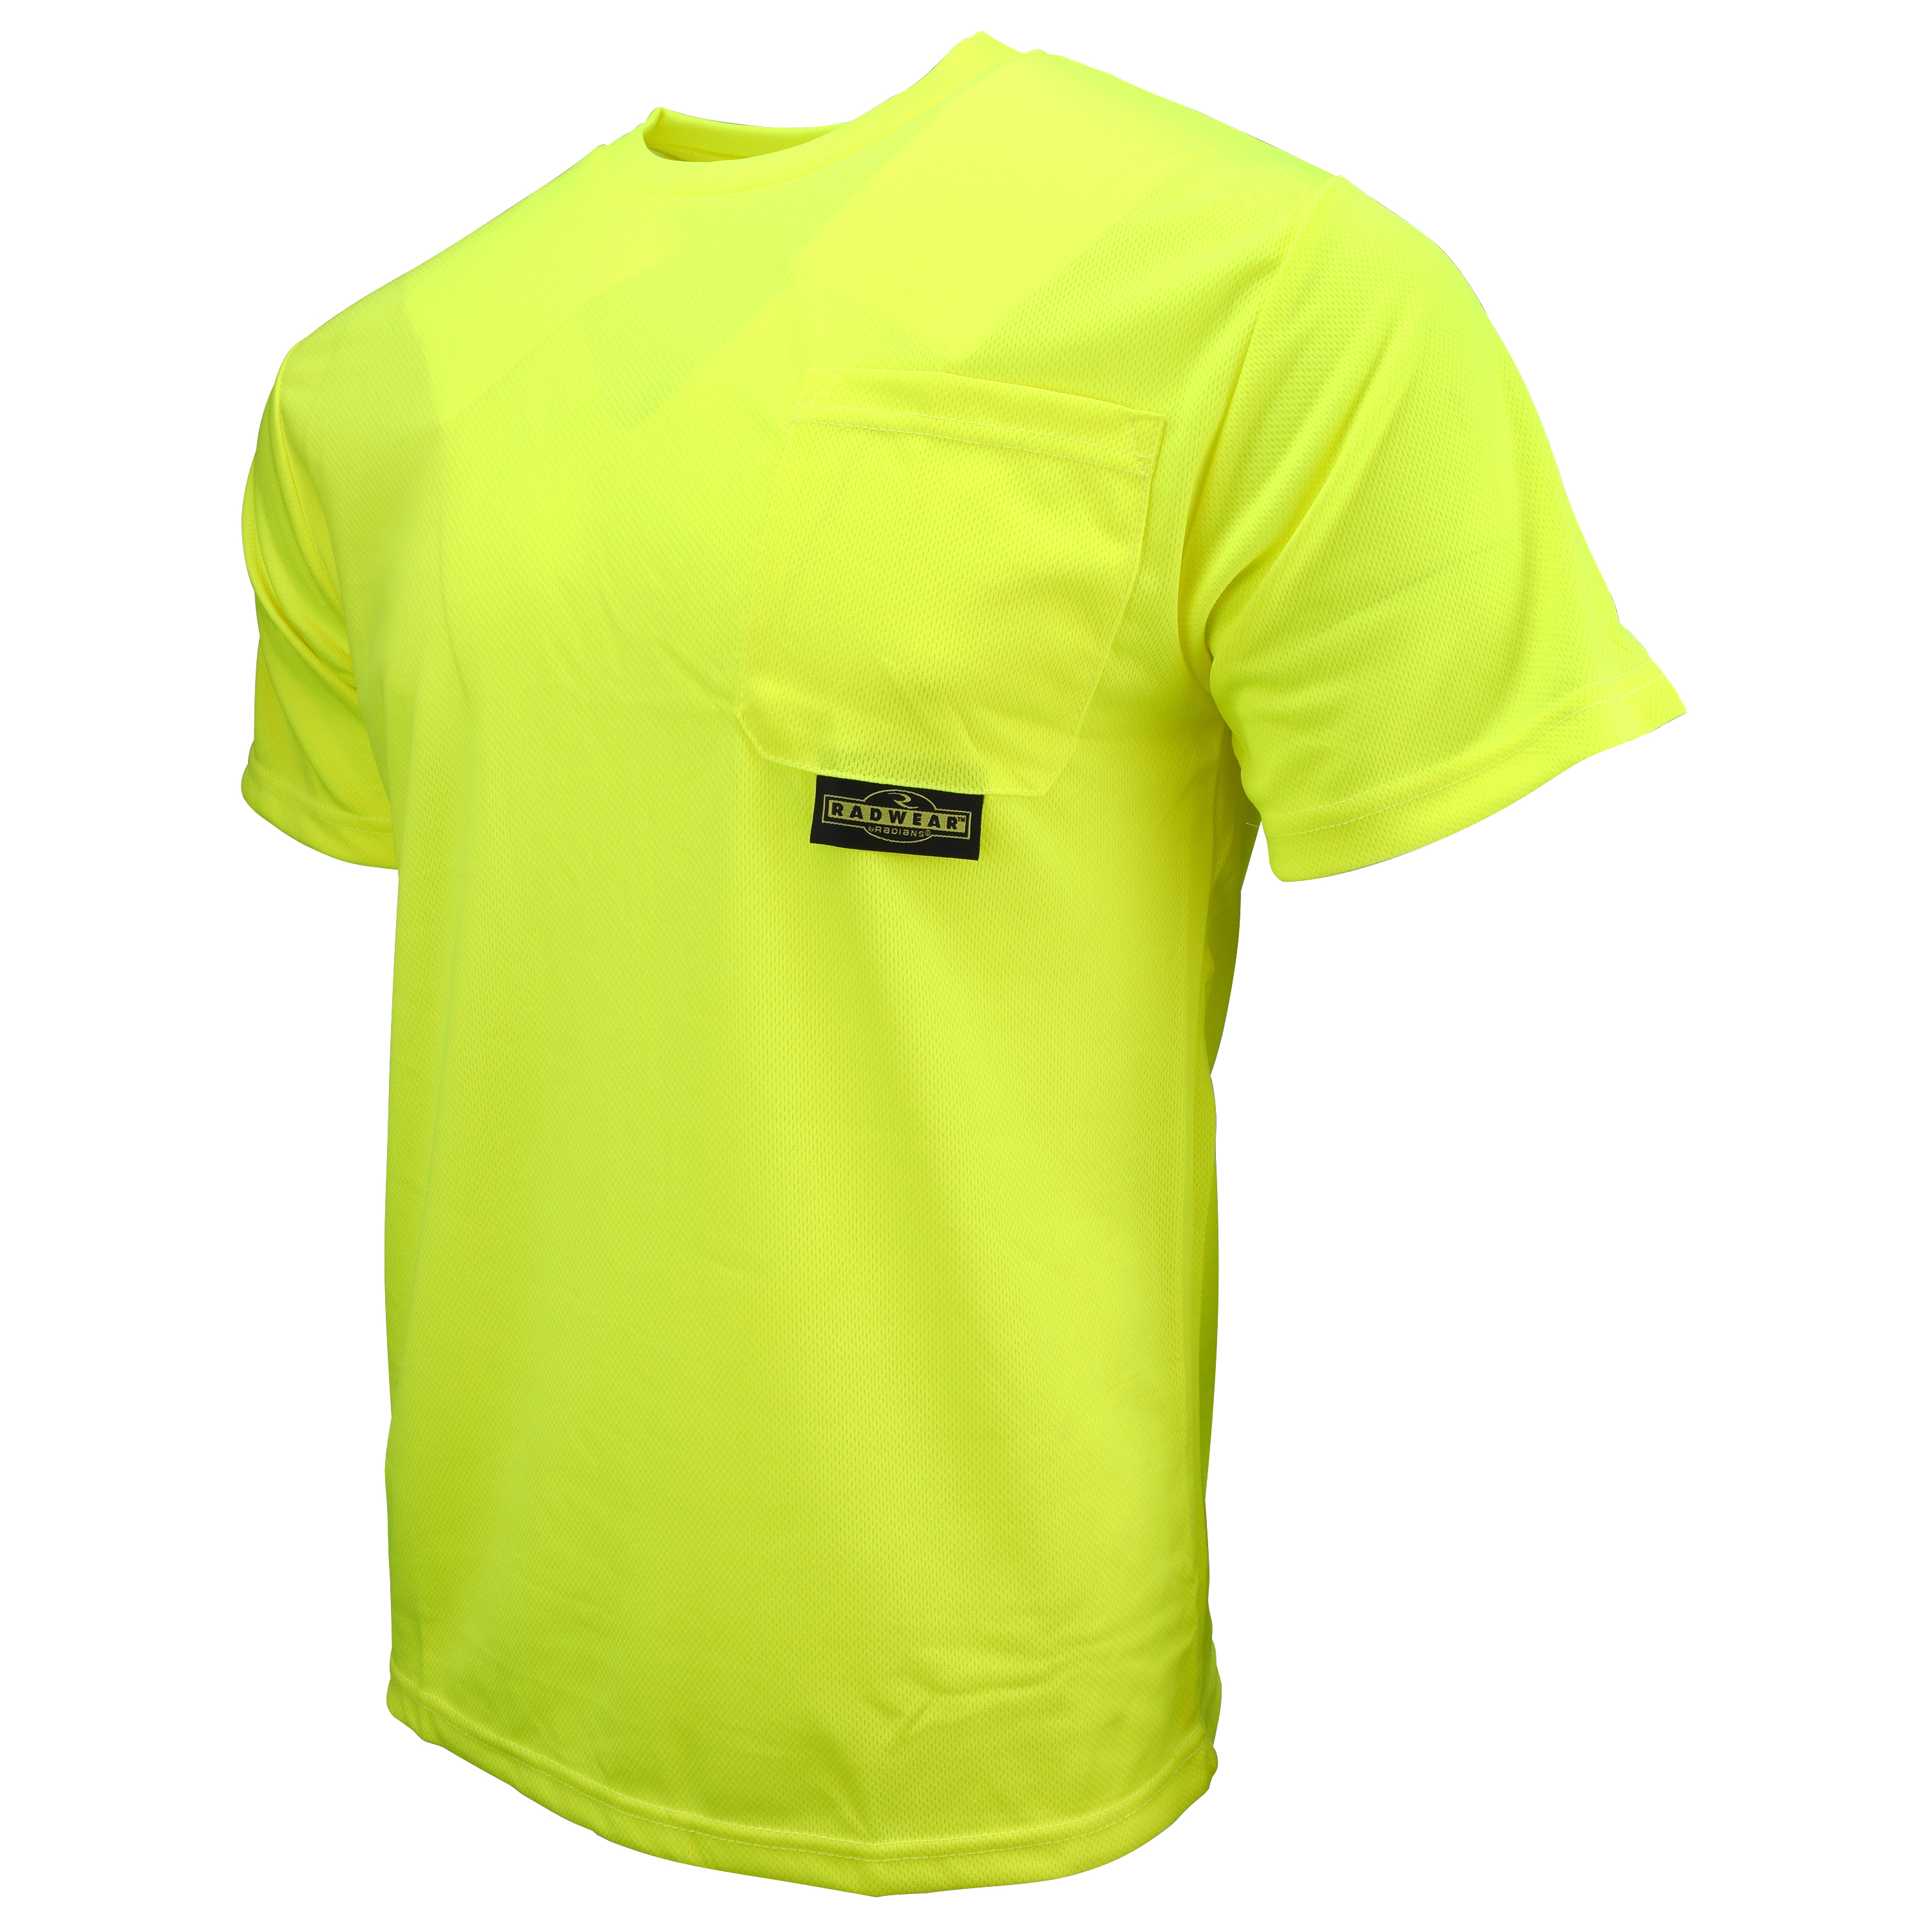 ST11-N Non-Rated Short Sleeve Safety T-Shirt with Max-Dri™ - Green - Size M - Hi-Visibility